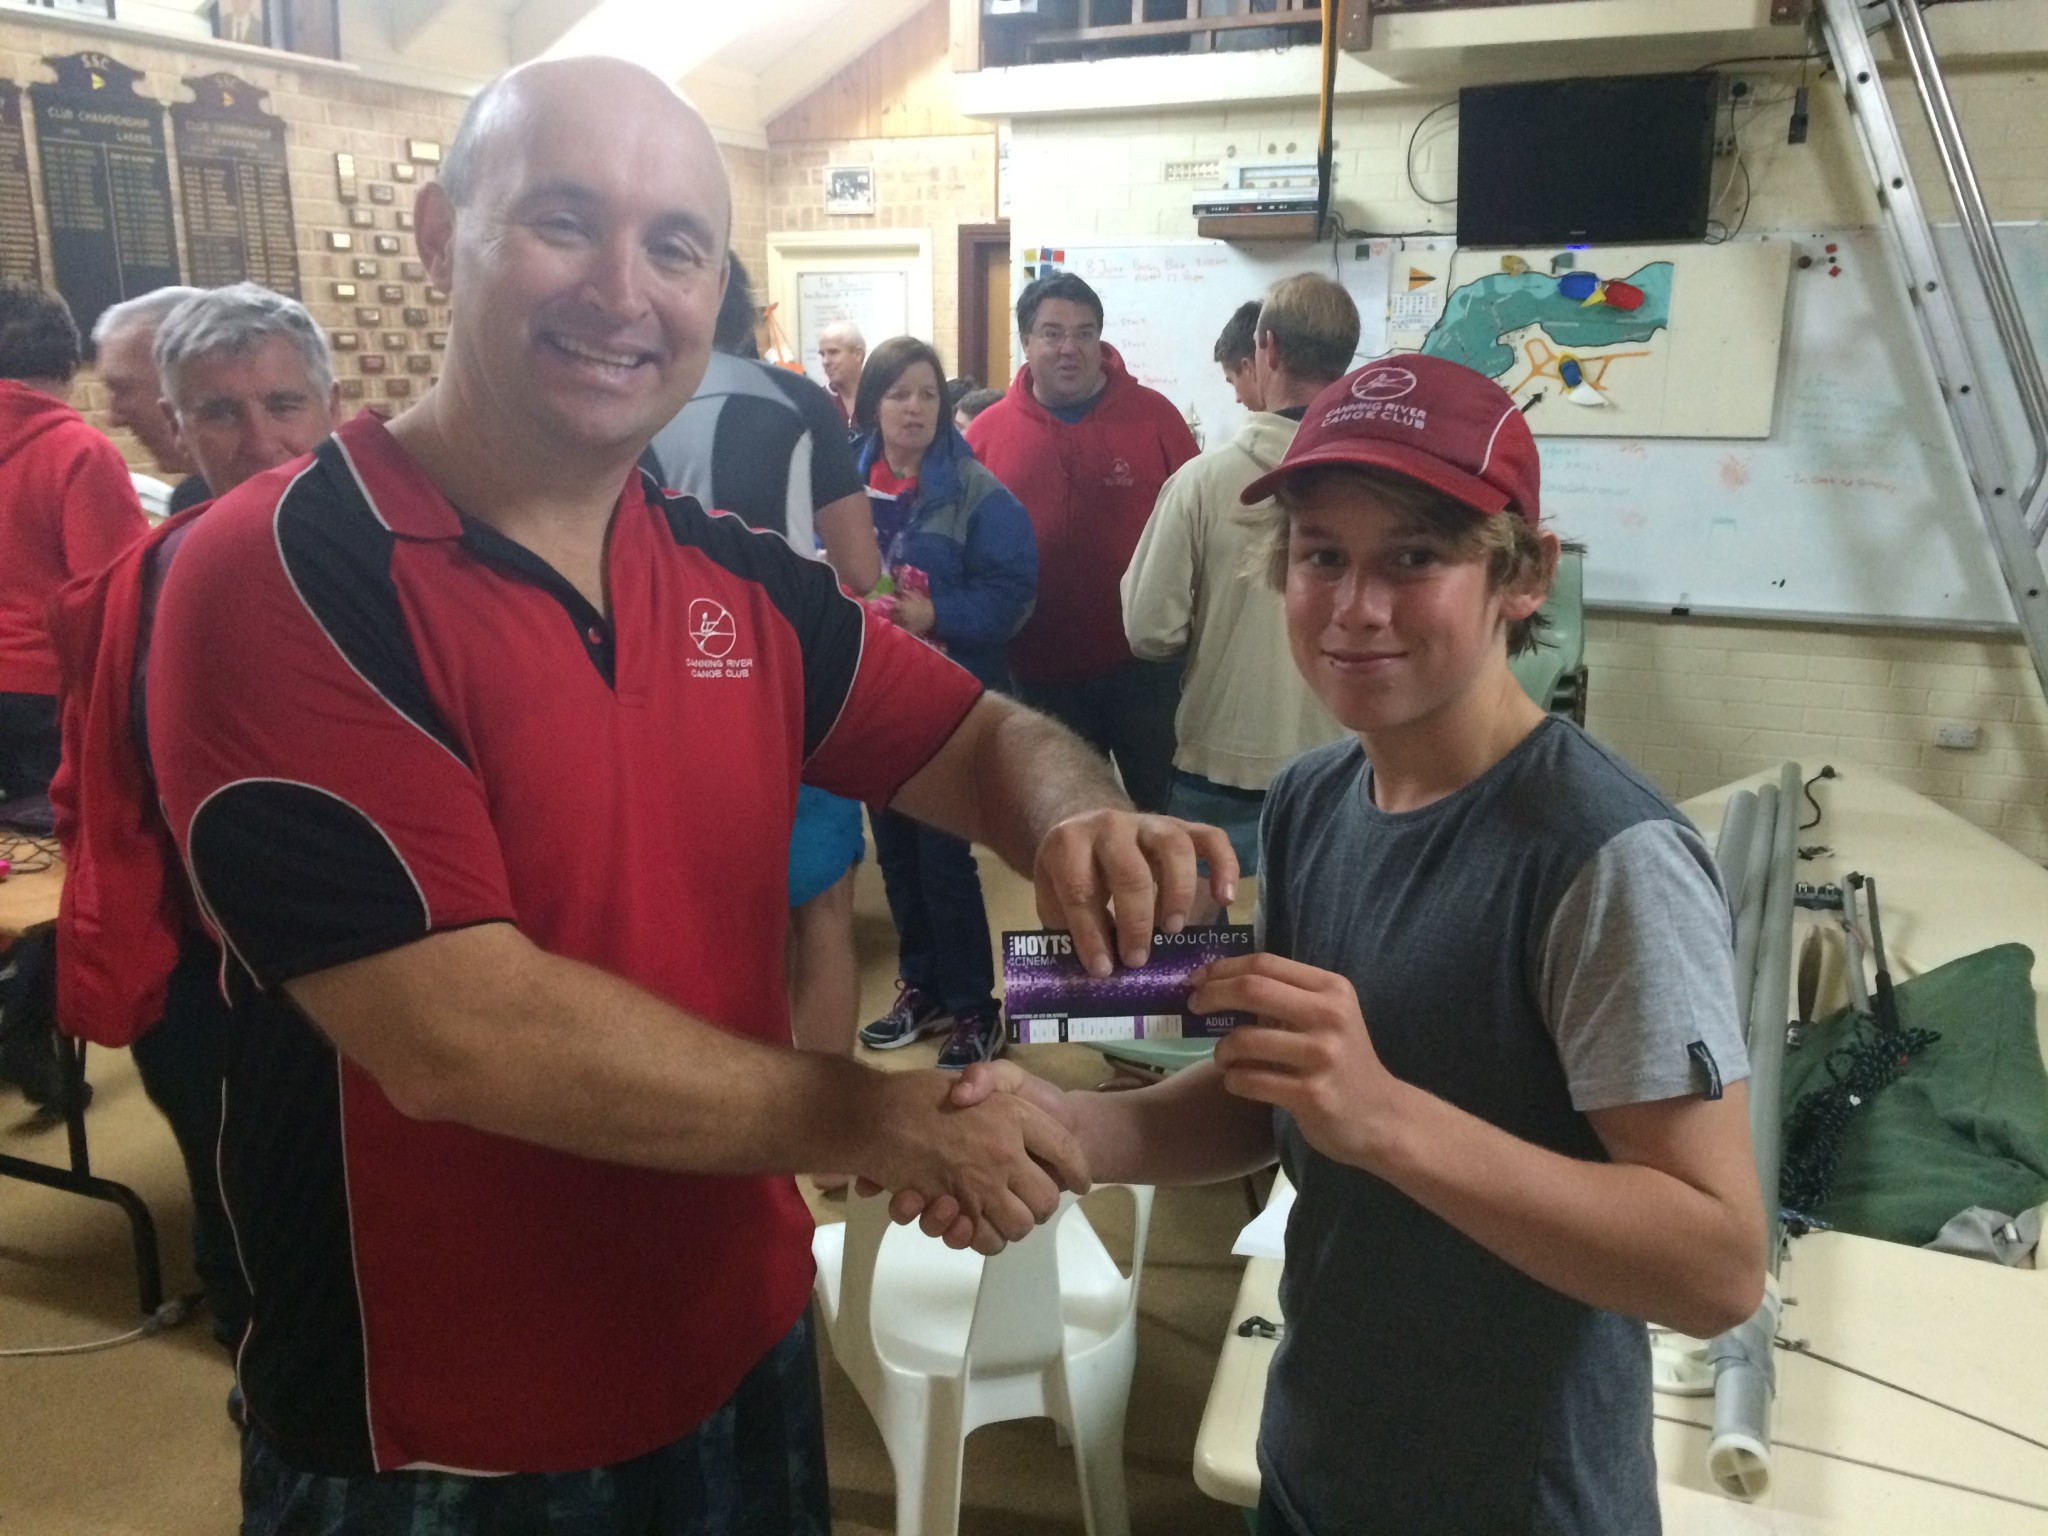 Tuesday 16th June : Club member Mike Galanty presenting tonight's winner Tom Green with a movie voucher